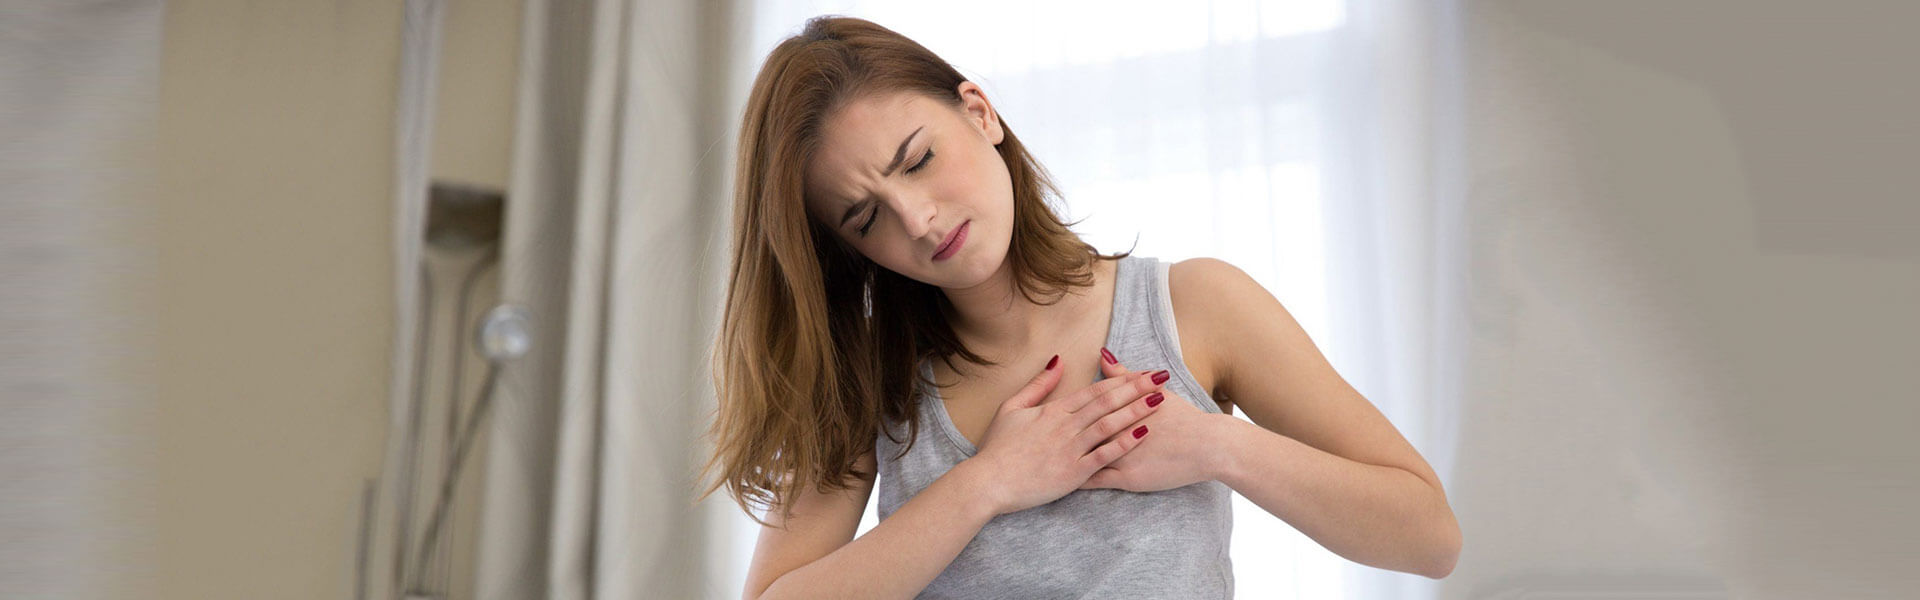 What Should I Do When I Have Chest Pain?